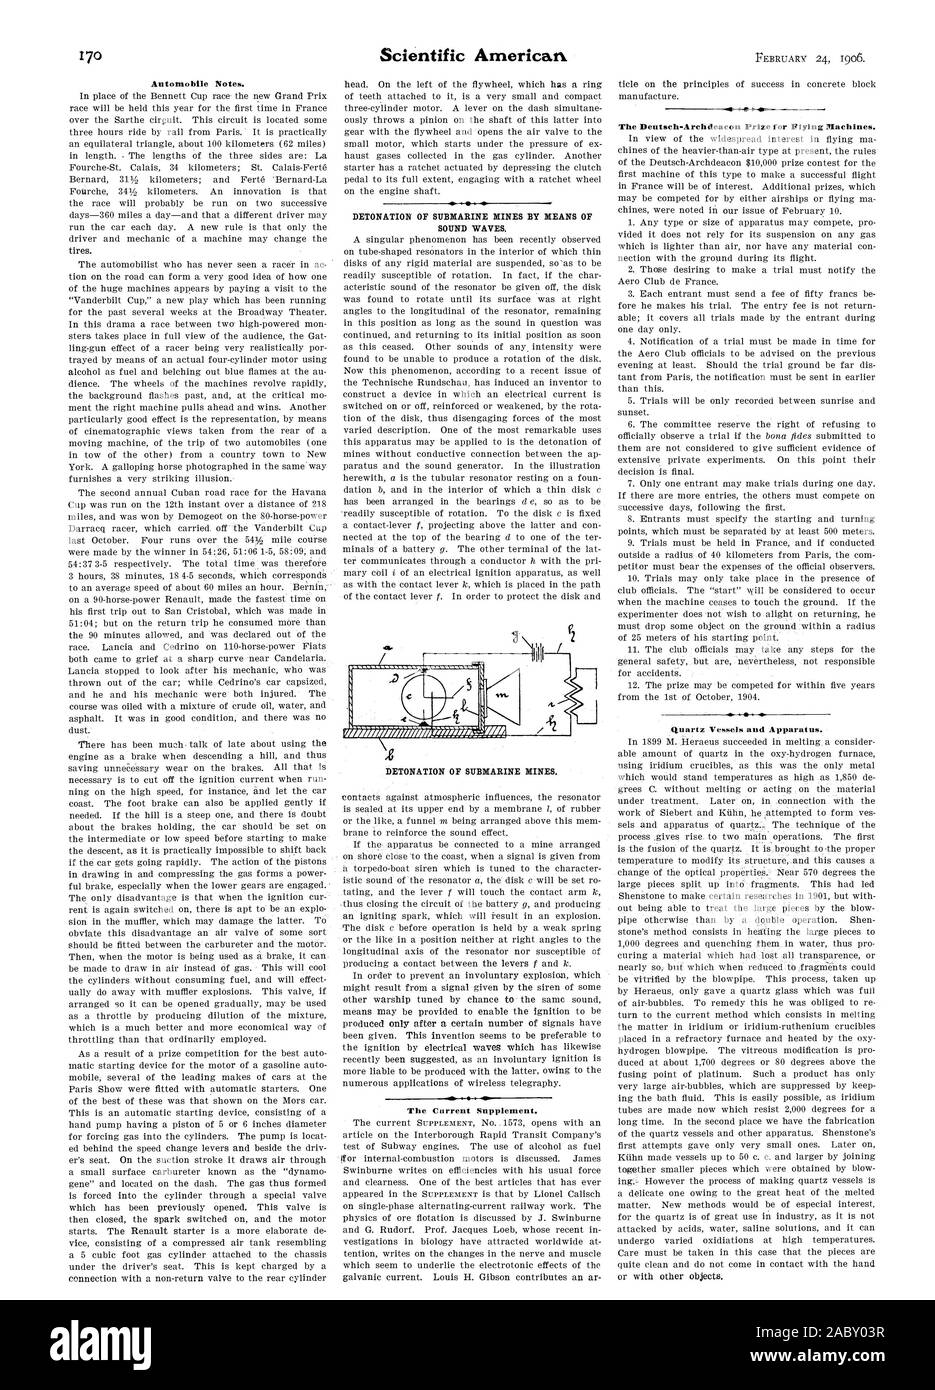 Automobile Notes. DETONATION OF SUBMARINE MINES. The Current Supplement. The Deutsch-Archdeacon Prize for Flying Machines. 1, scientific american, 1906-02-24 Stock Photo